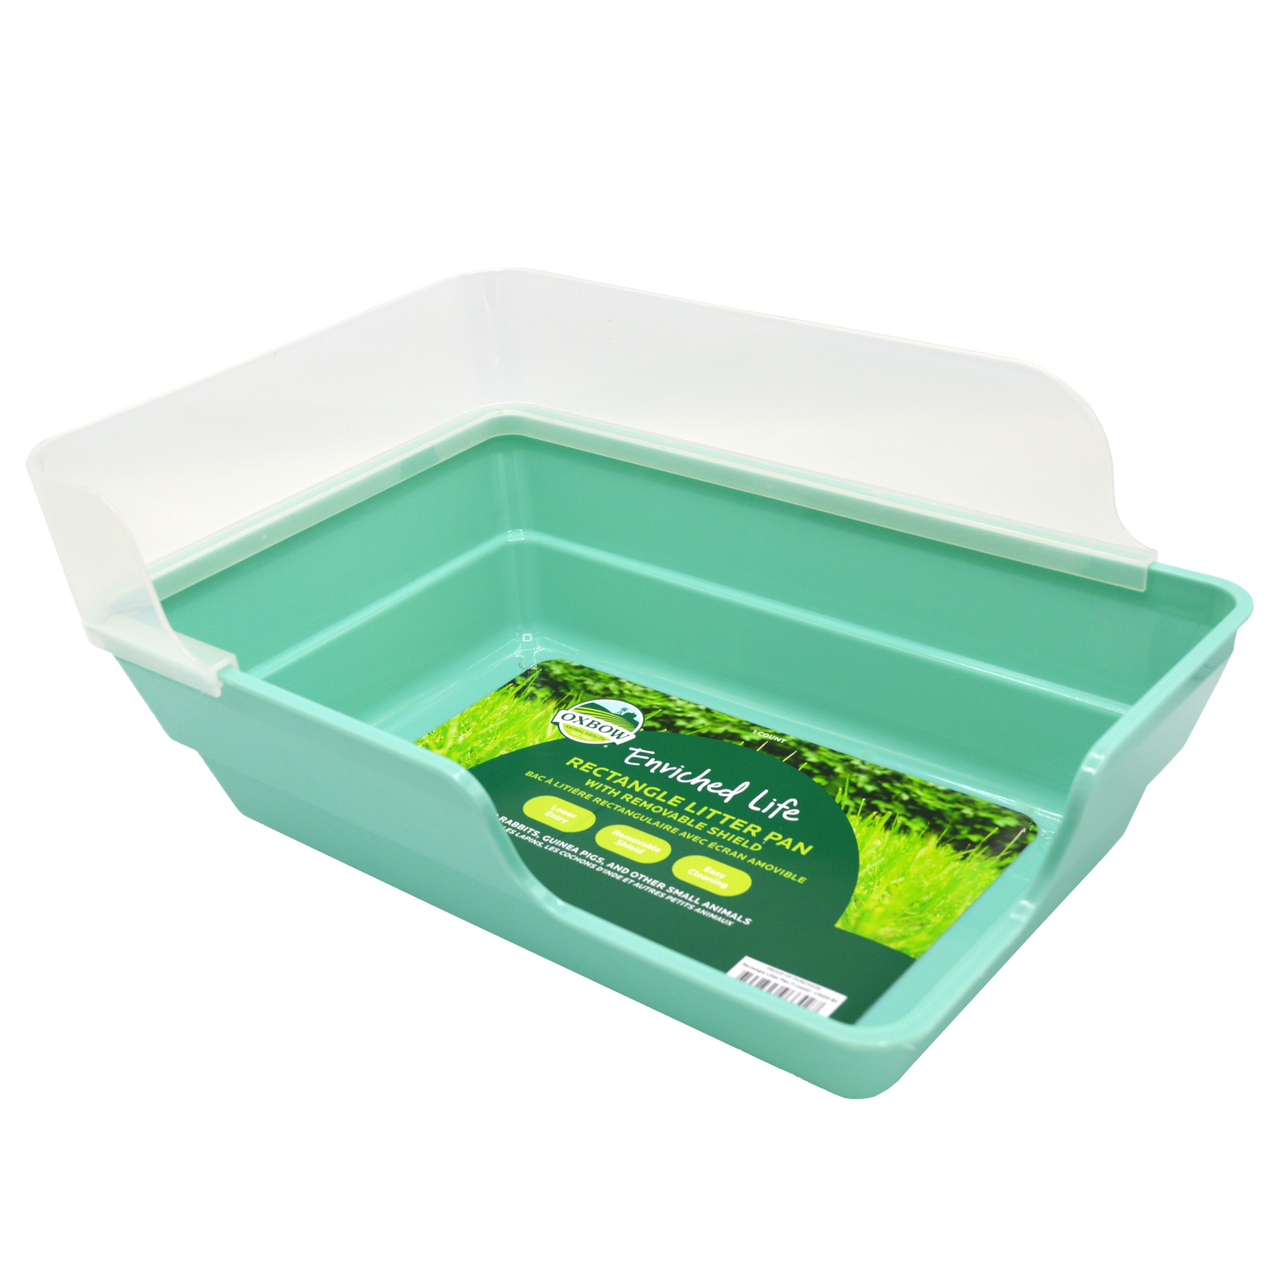 Oxbow Animal Health Enriched Life Small Animal Rectangle Litter Pan w/Removable Shield Mint Green One Size